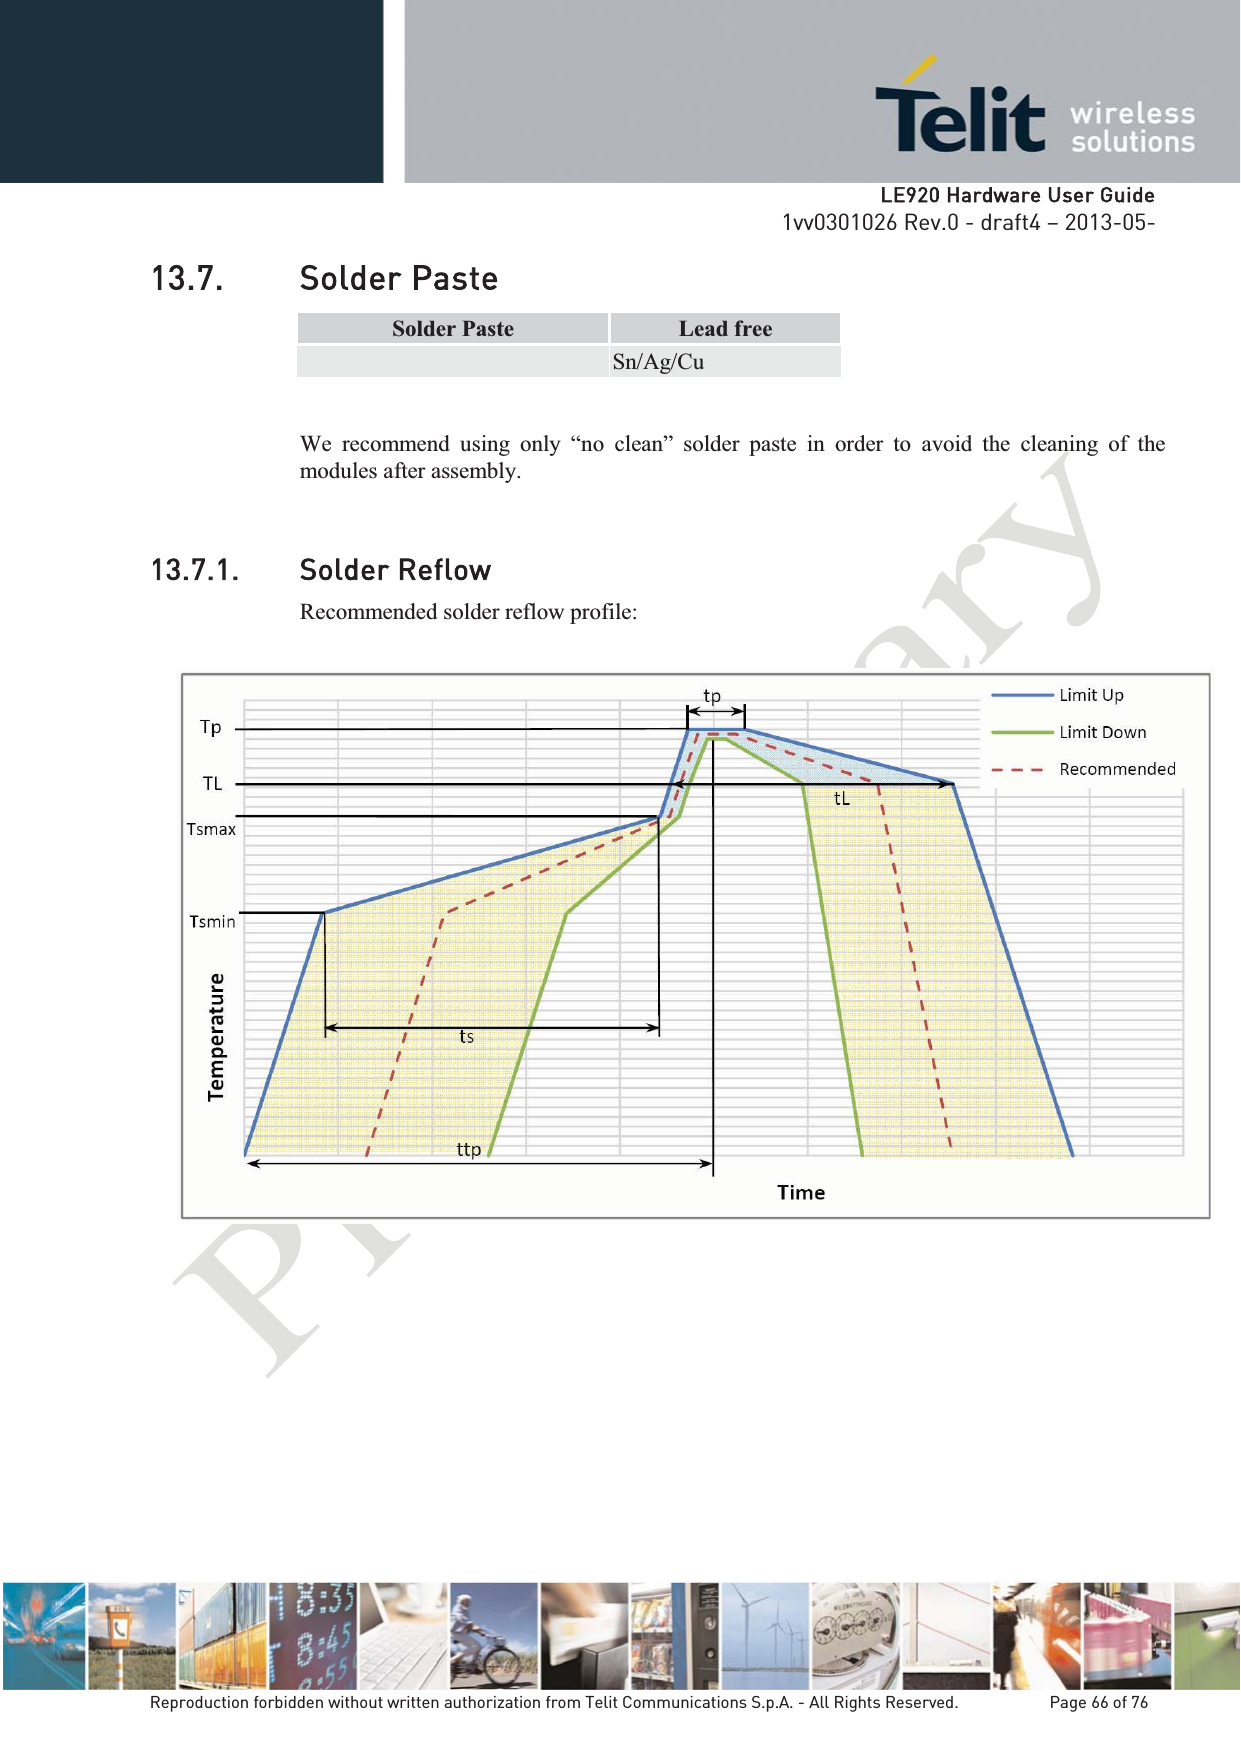   LLE920 Hardware User Guide1vv0301026 Rev.0 - draft4 – 2013-05-Reproduction forbidden without written authorization from Telit Communications S.p.A. - All Rights Reserved.    Page 66 of 76 13.7. Solder PasteSolder Paste  Lead free Sn/Ag/Cu We recommend using only “no clean” solder paste in order to avoid the cleaning of the modules after assembly. 13.7.1. Solder Reflow Recommended solder reflow profile:  